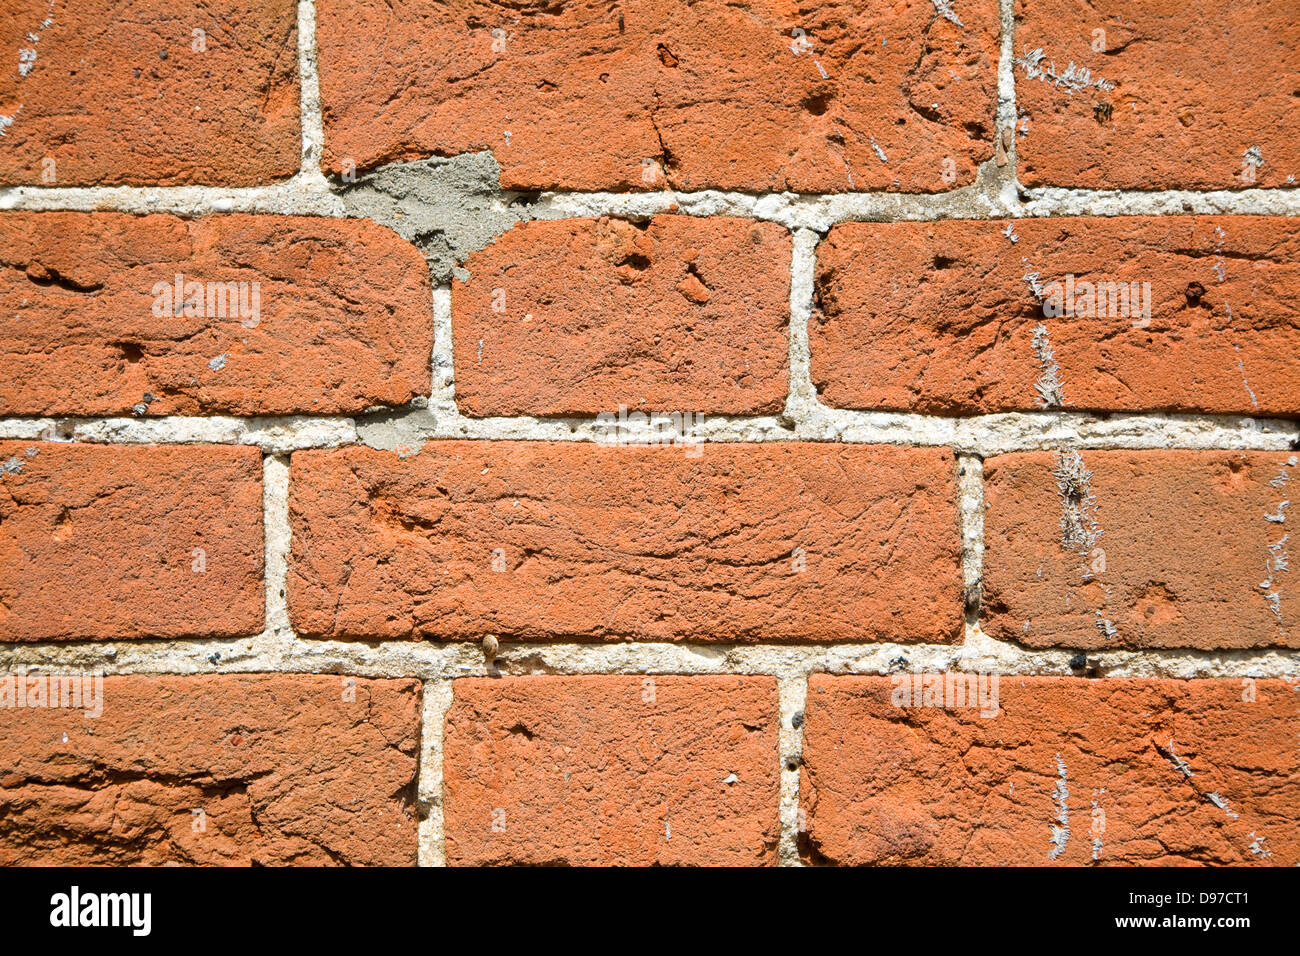 Red brick wall with white mortar joints and holes created by insects Stock Photo